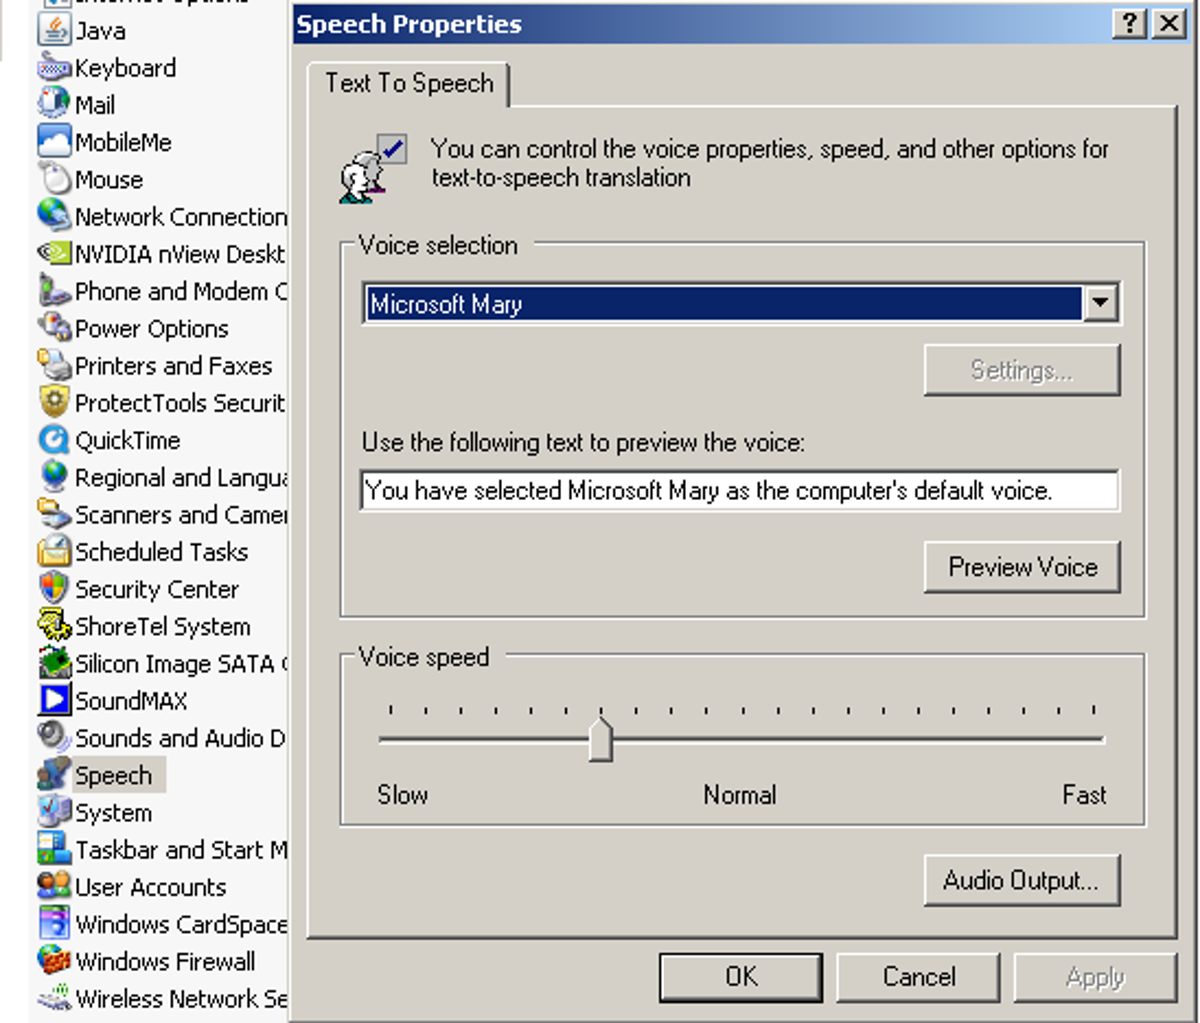 Image of the Speech properties window found in the Windows XP operating system.